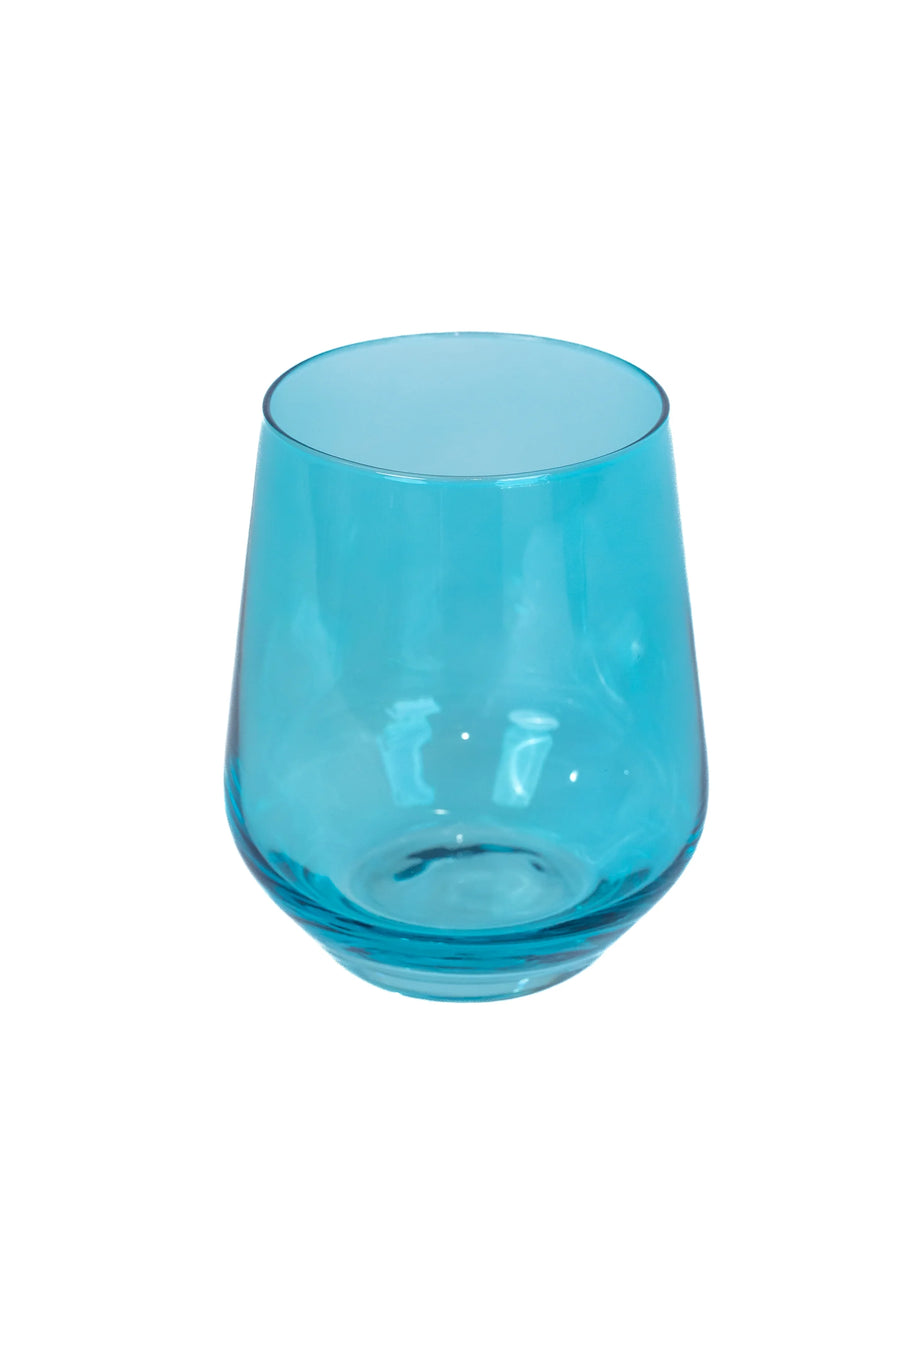 Estelle Colored Stemless Wine Glass - All Colors BACKORDERED